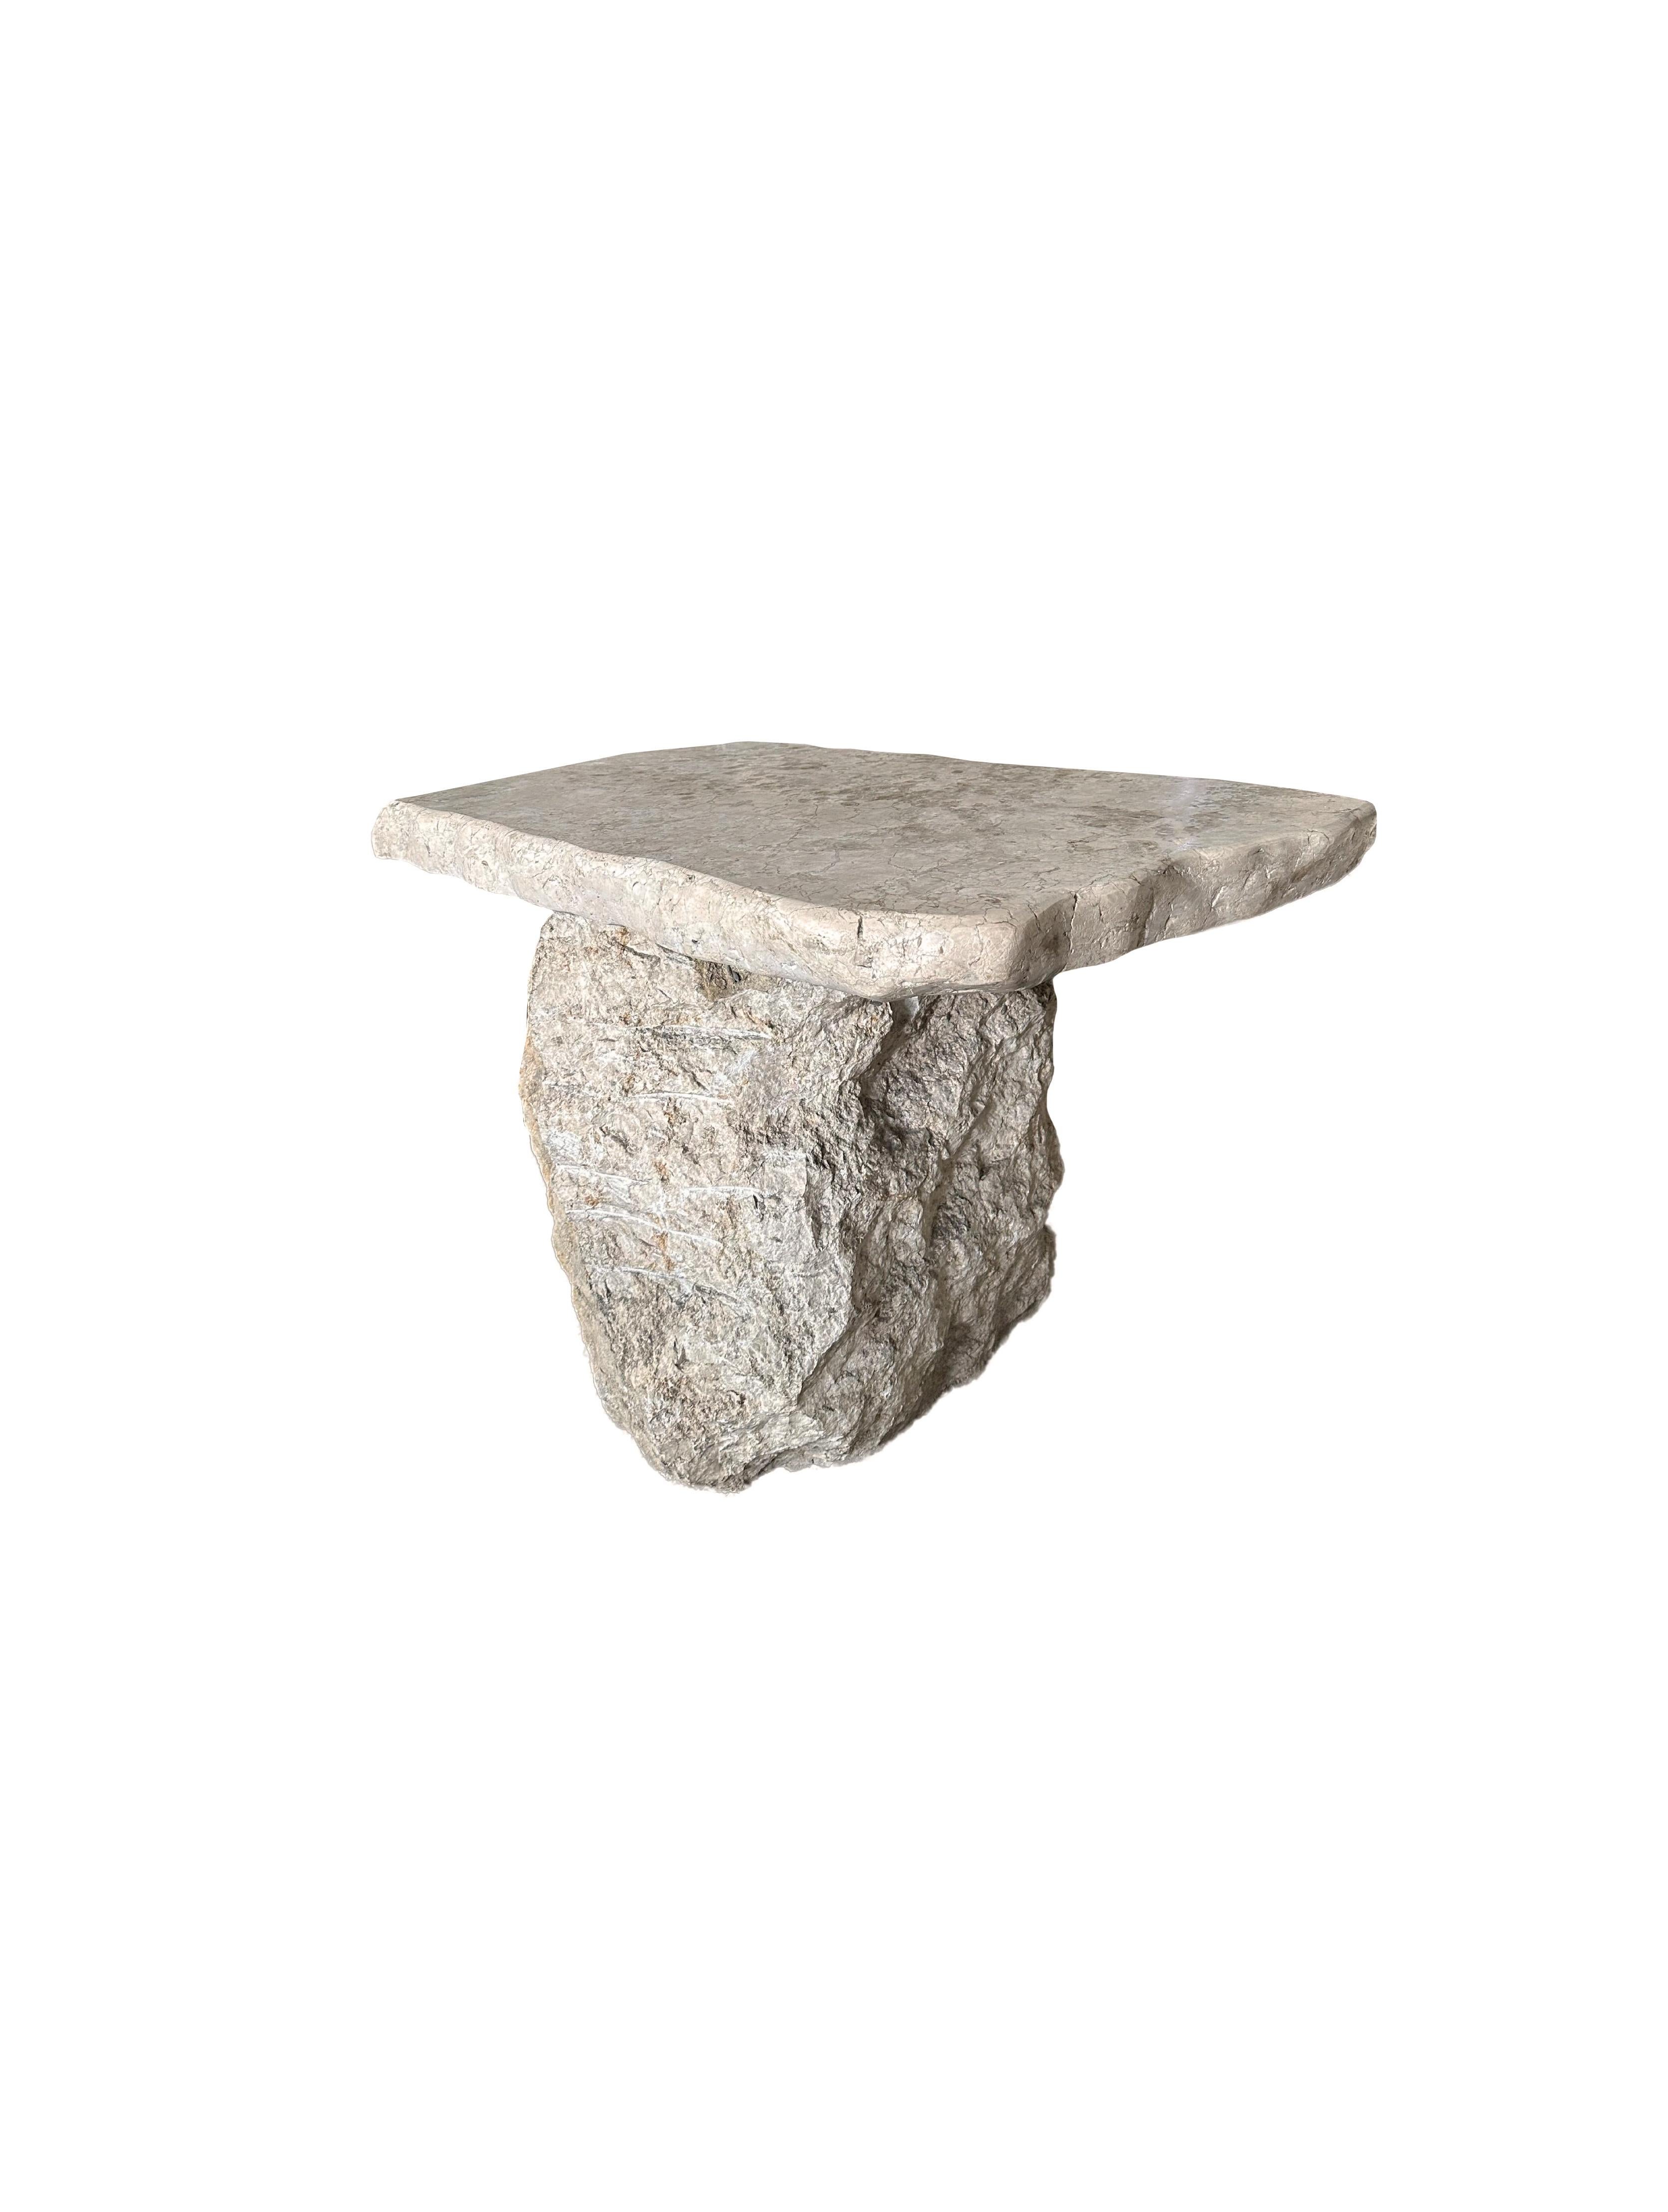 A sculptural marble table, featuring a wonderful mixture of textures and shades. This table features a rough textured, solid base and a solid table top that has been polished. The mix of curved and straight lines adds to its charm.